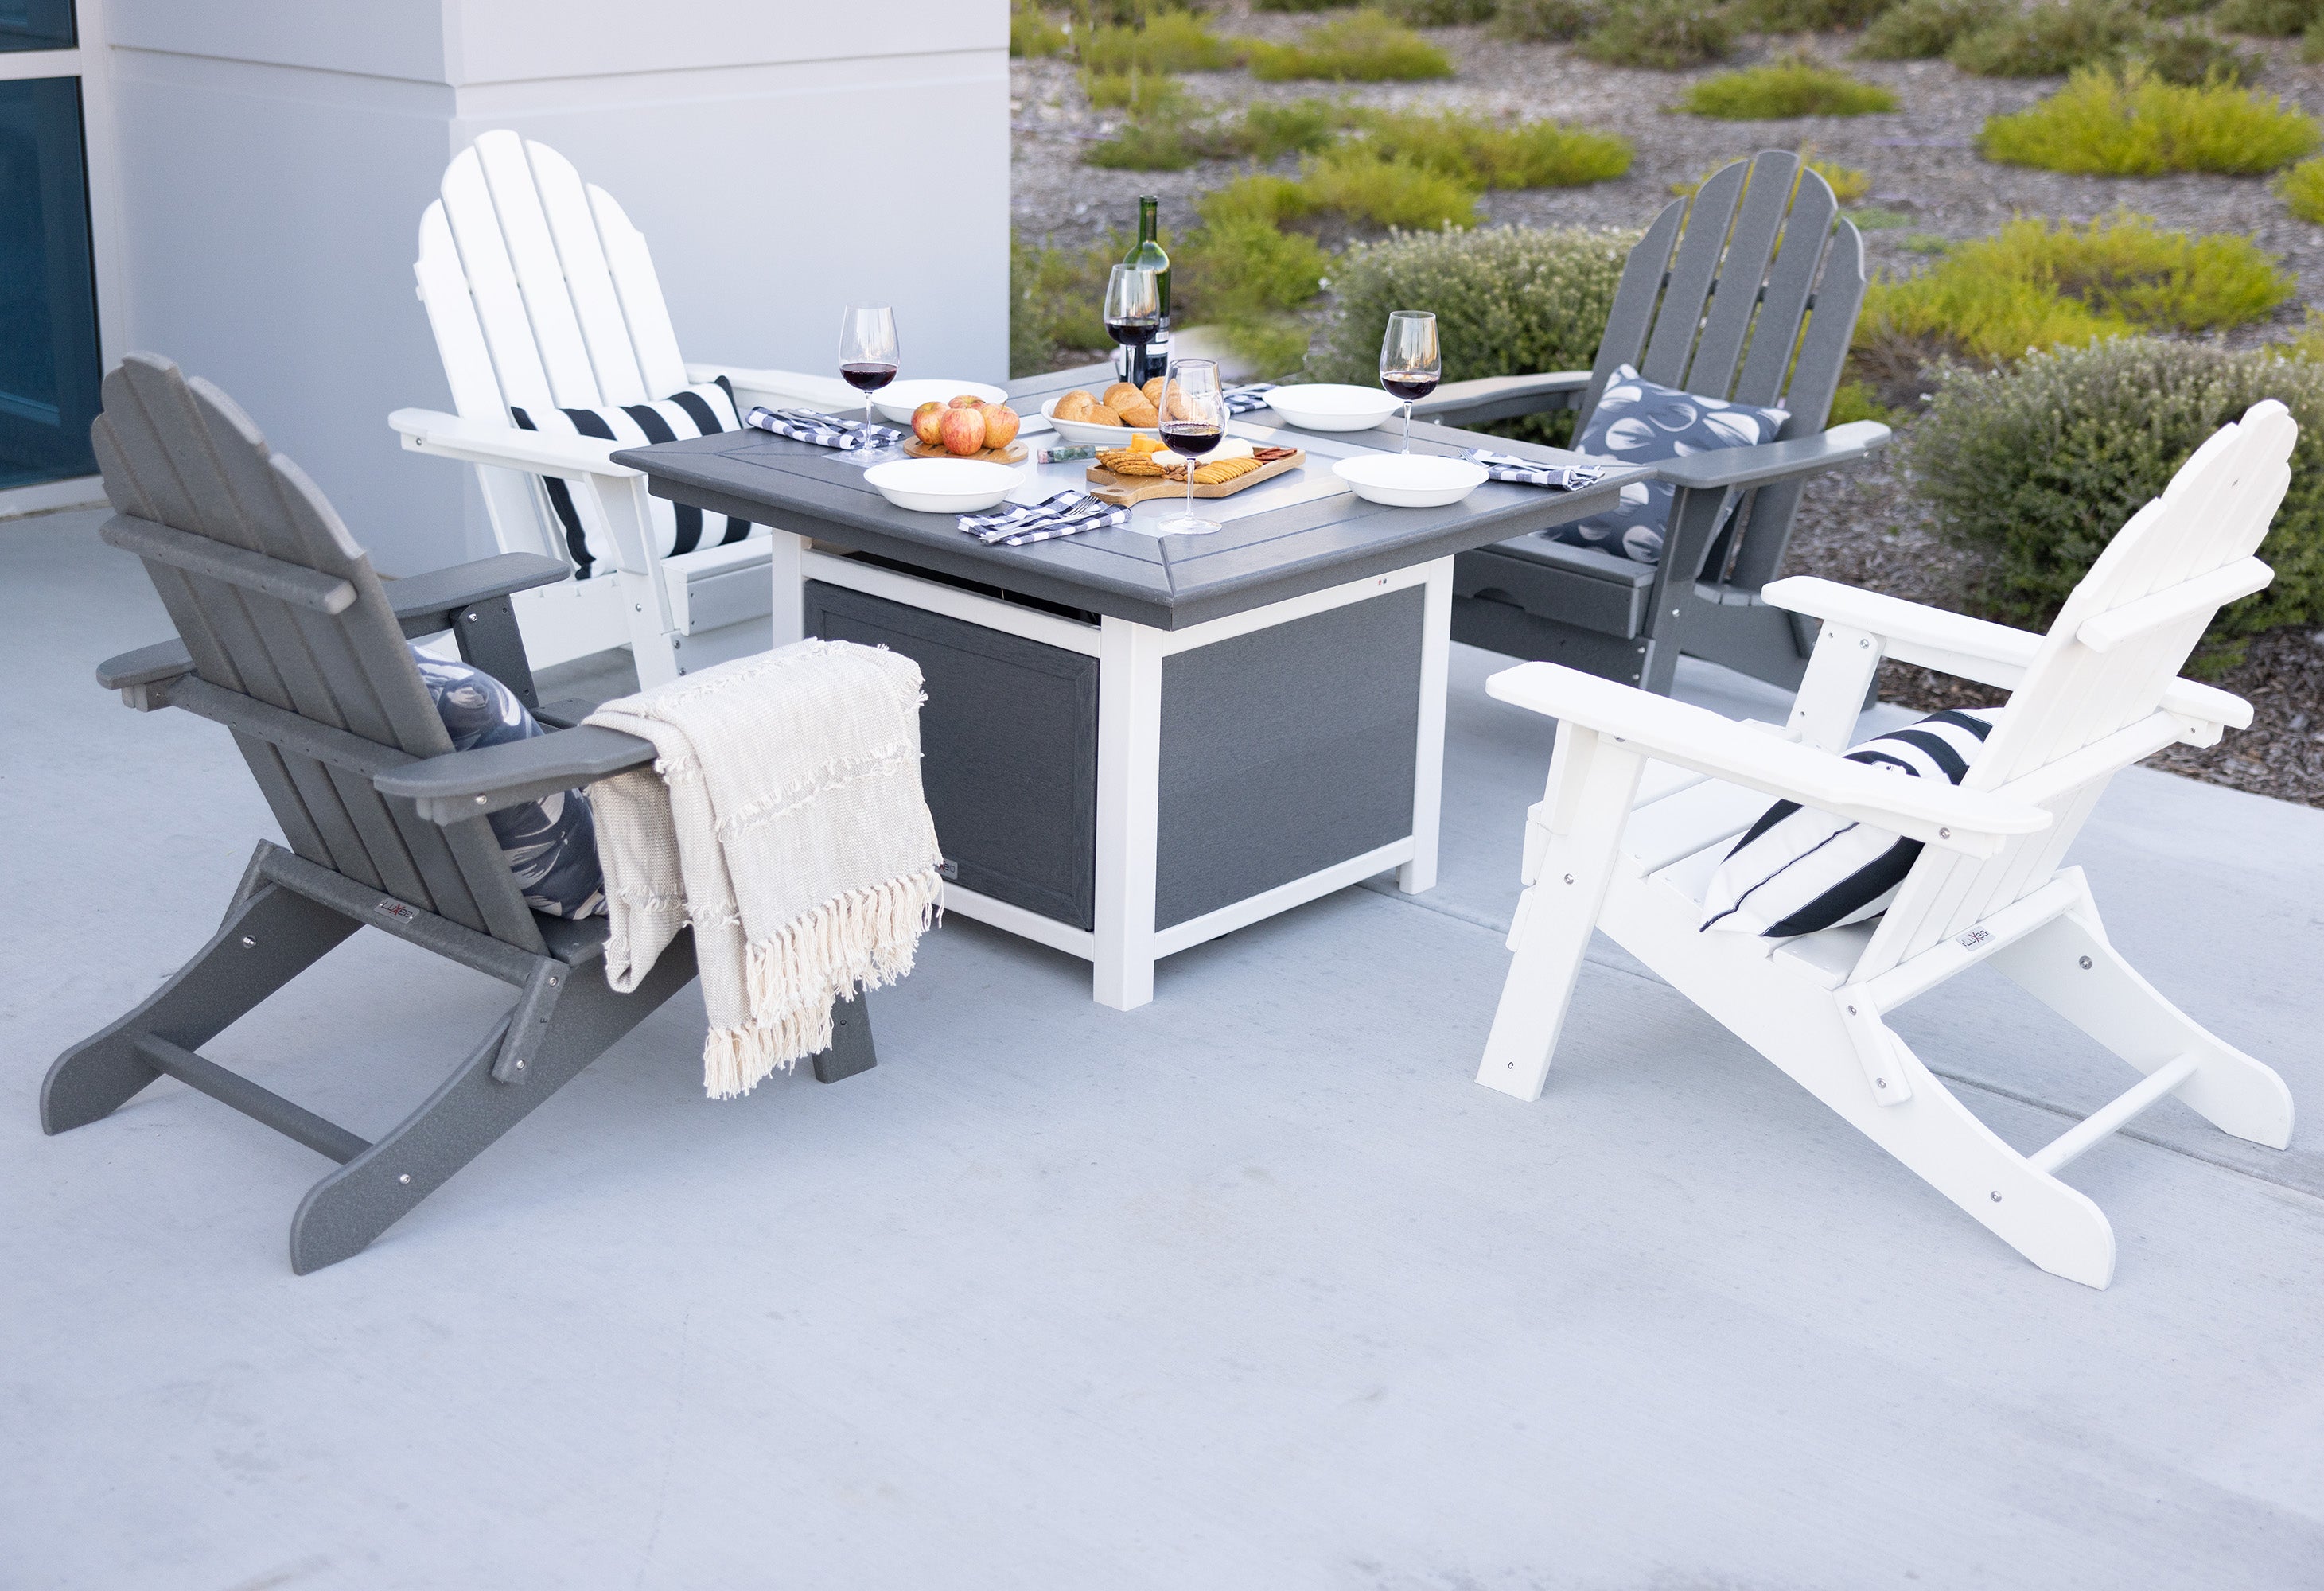 LuXeo Park City 42" Two-Tone Fire Pit Table, Square Top with Four Balboa Chairs